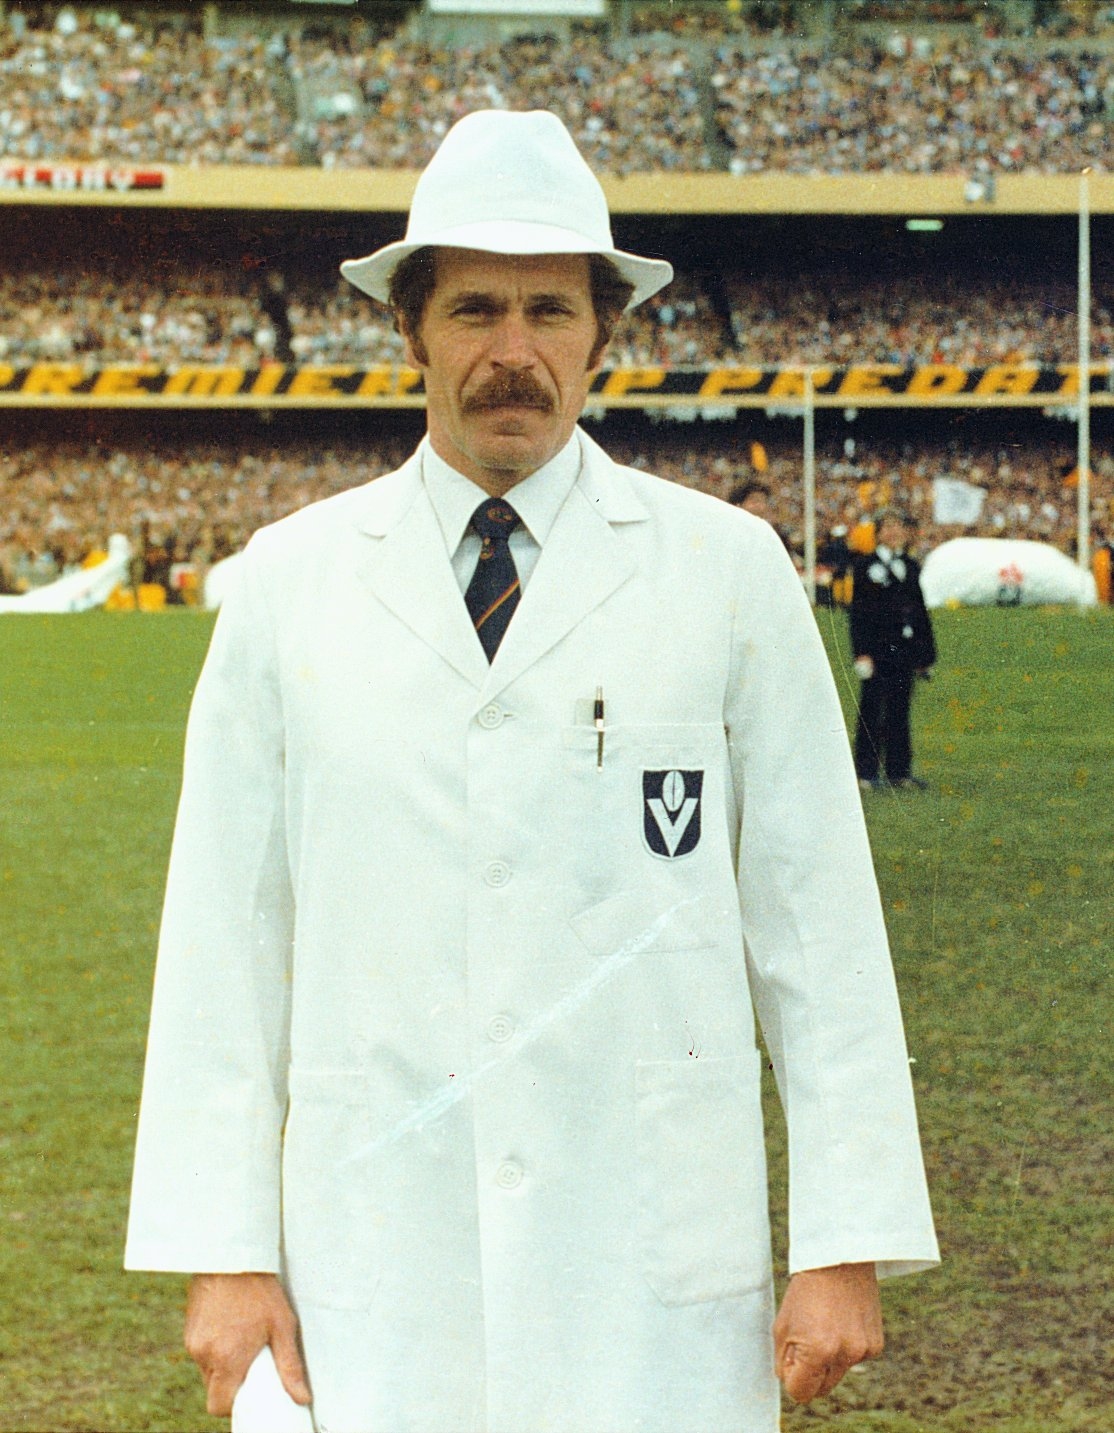 Yes, AFL's refs used to look like this